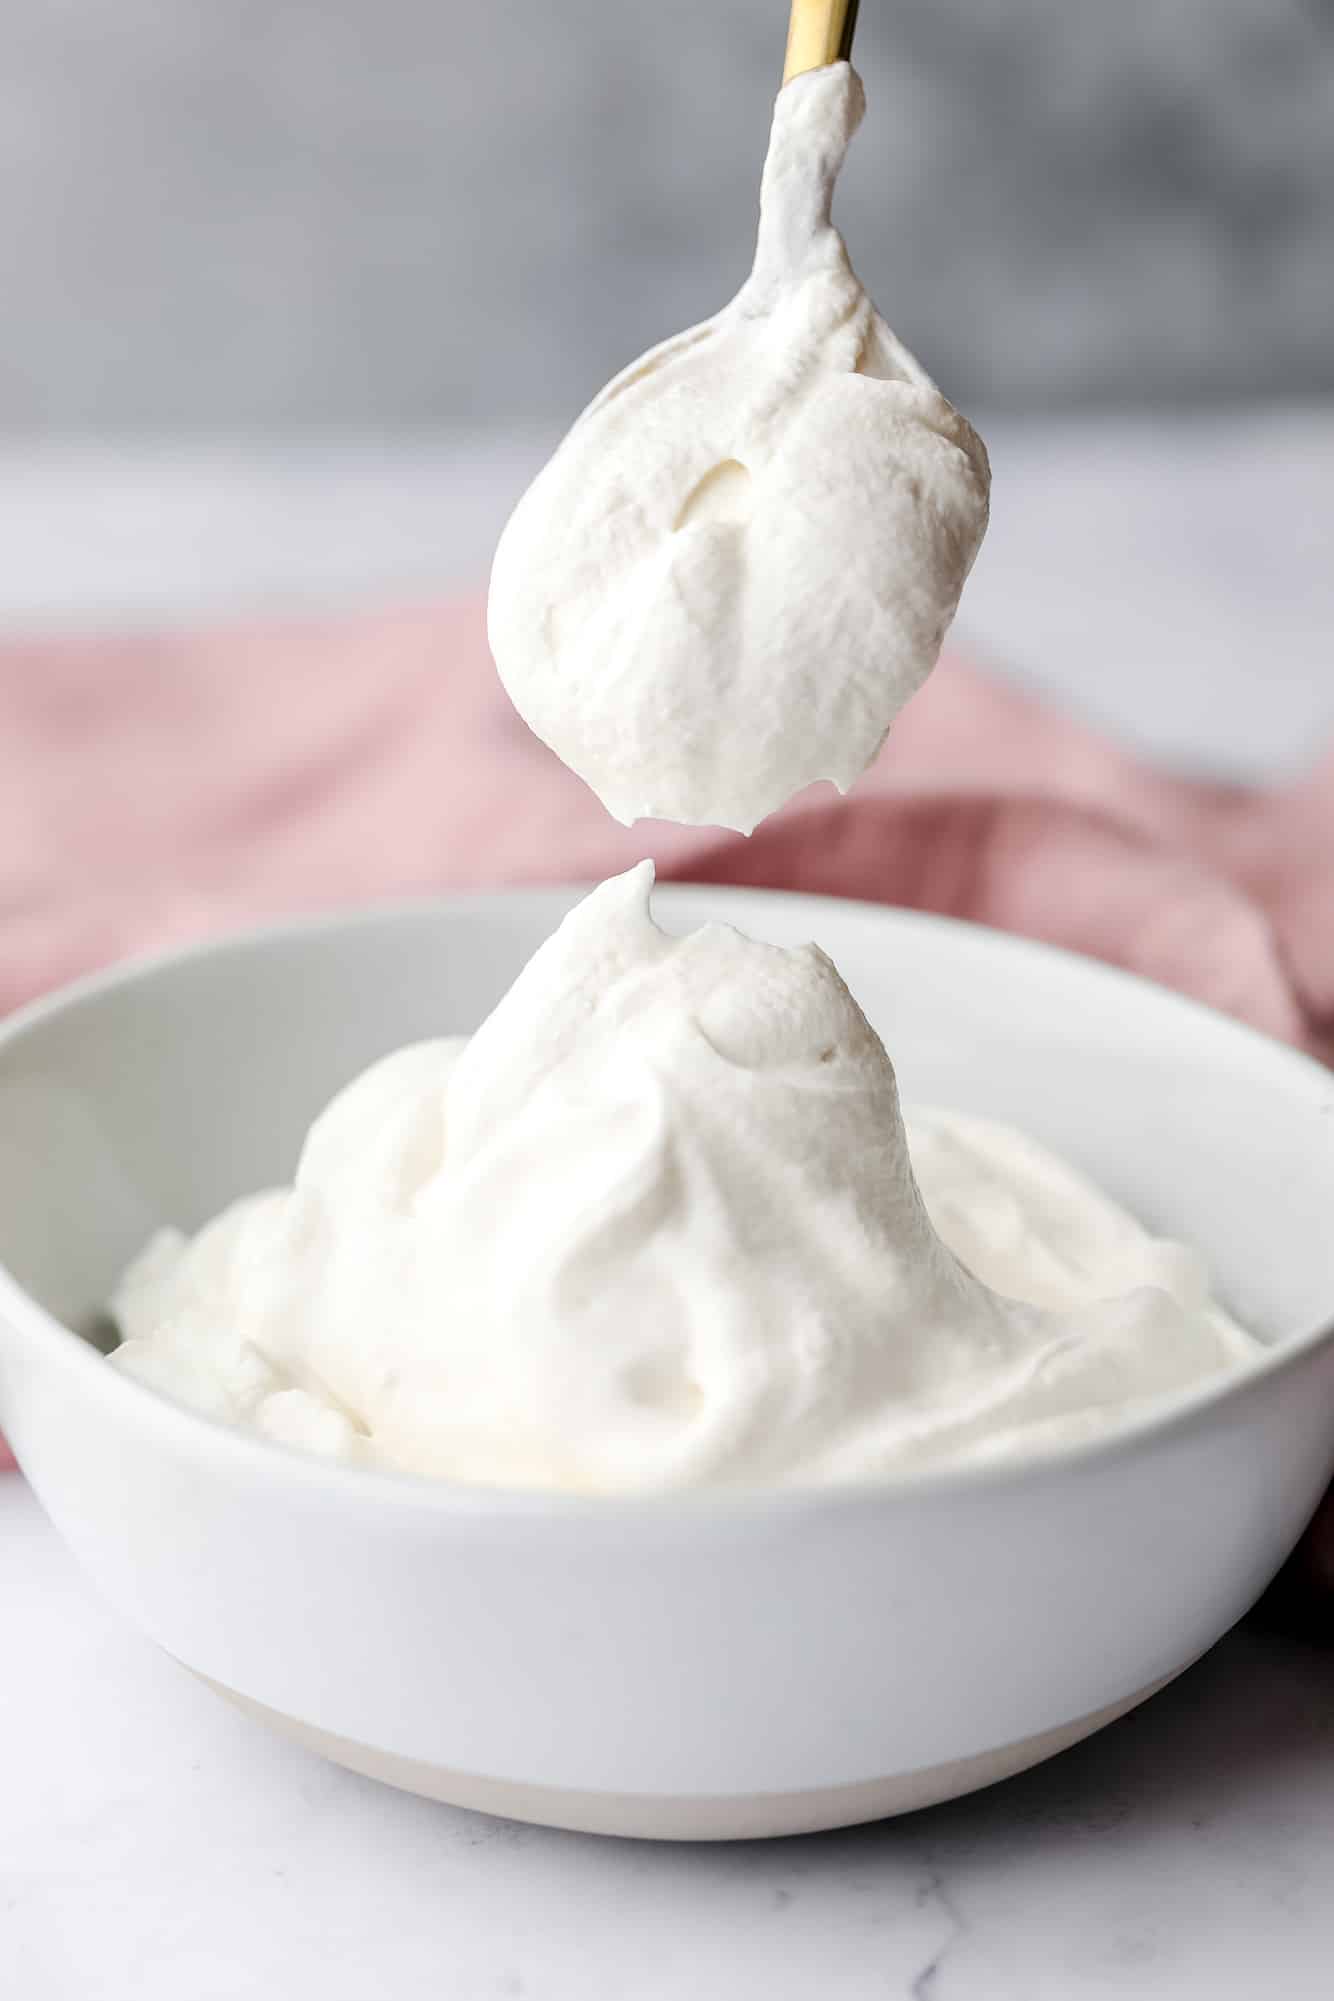 Heavy Whipping Cream Substitution - Nora Cooks